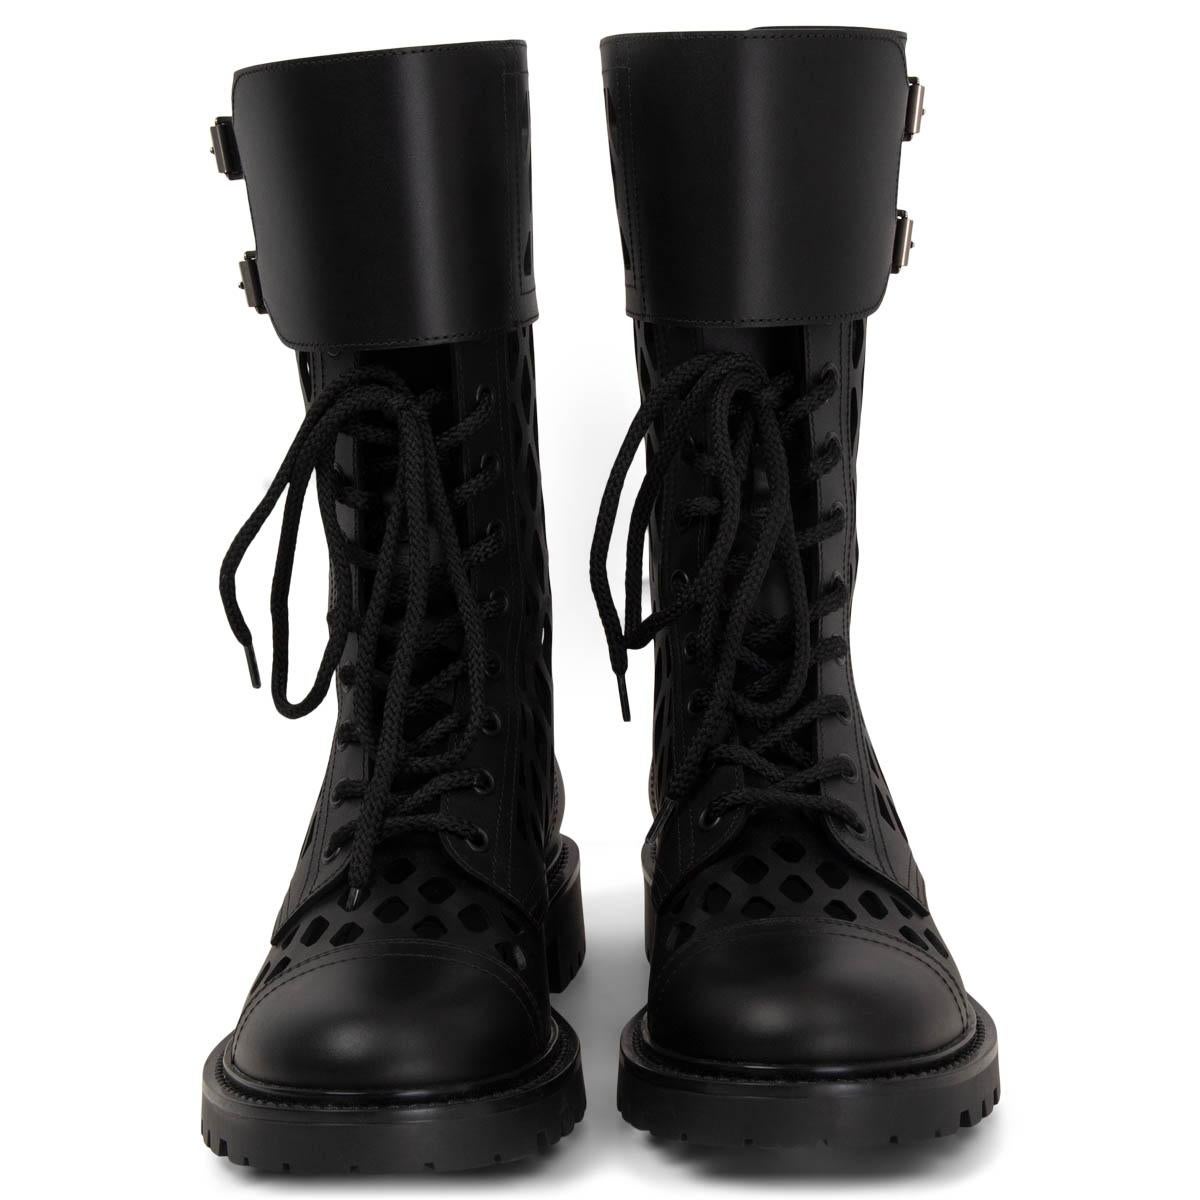 
100% authentic Christian Dior D-Trap Spring 20 lace-up cutout fishnet combat boots in black matte calfskin featuring buckle closure at top and chunky star rubber sole. Brand new. 

Measurements
Imprinted Size	39
Shoe Size	39
Inside Sole	26cm